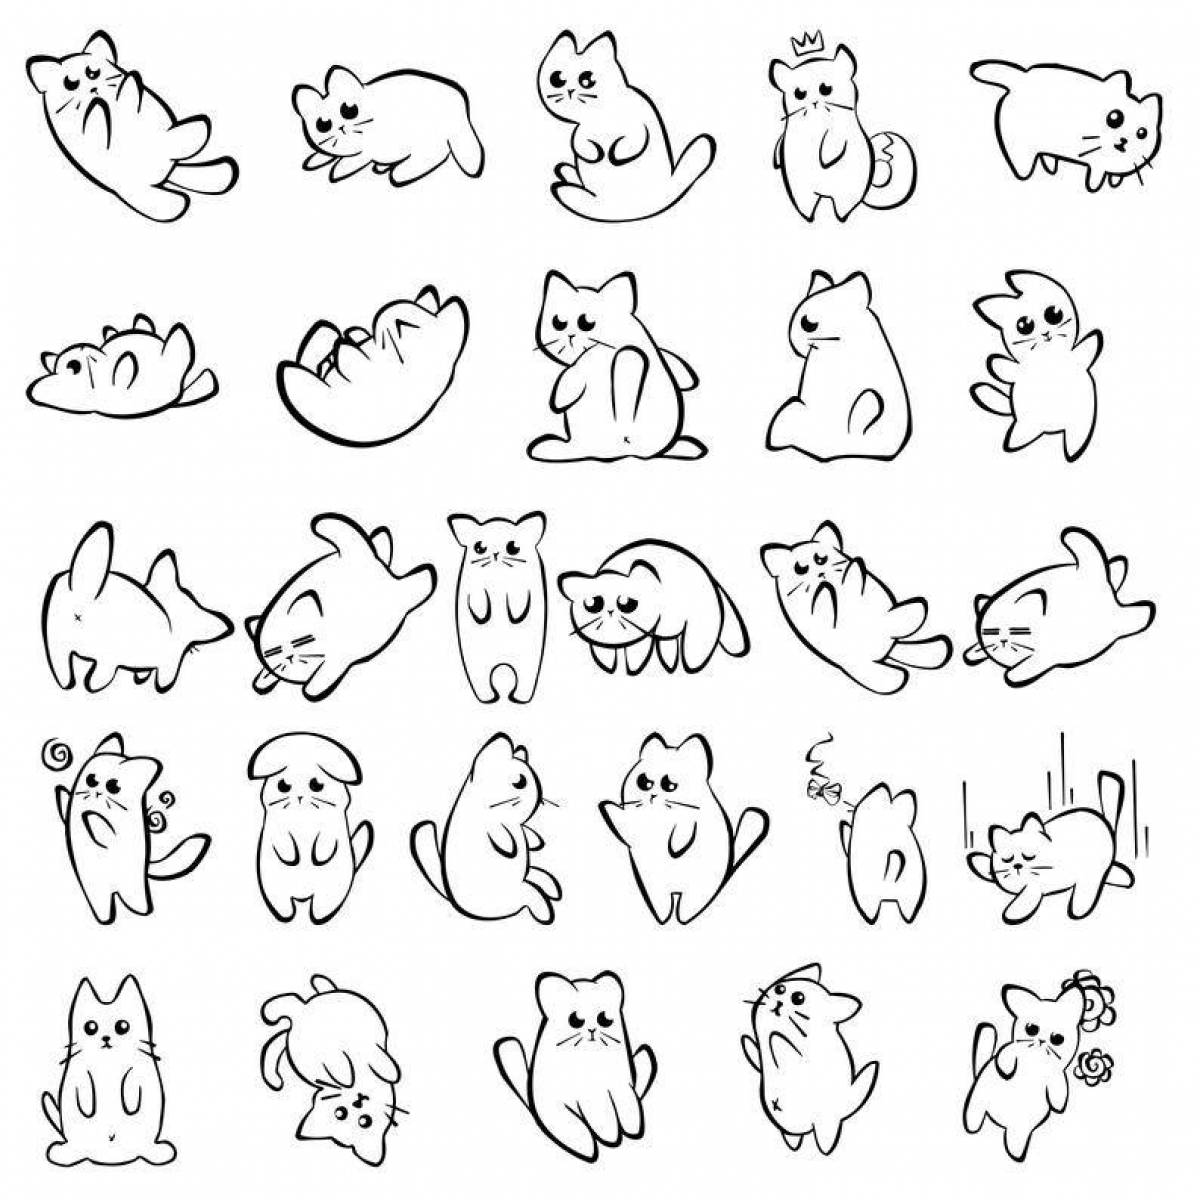 Fun stickers for coloring